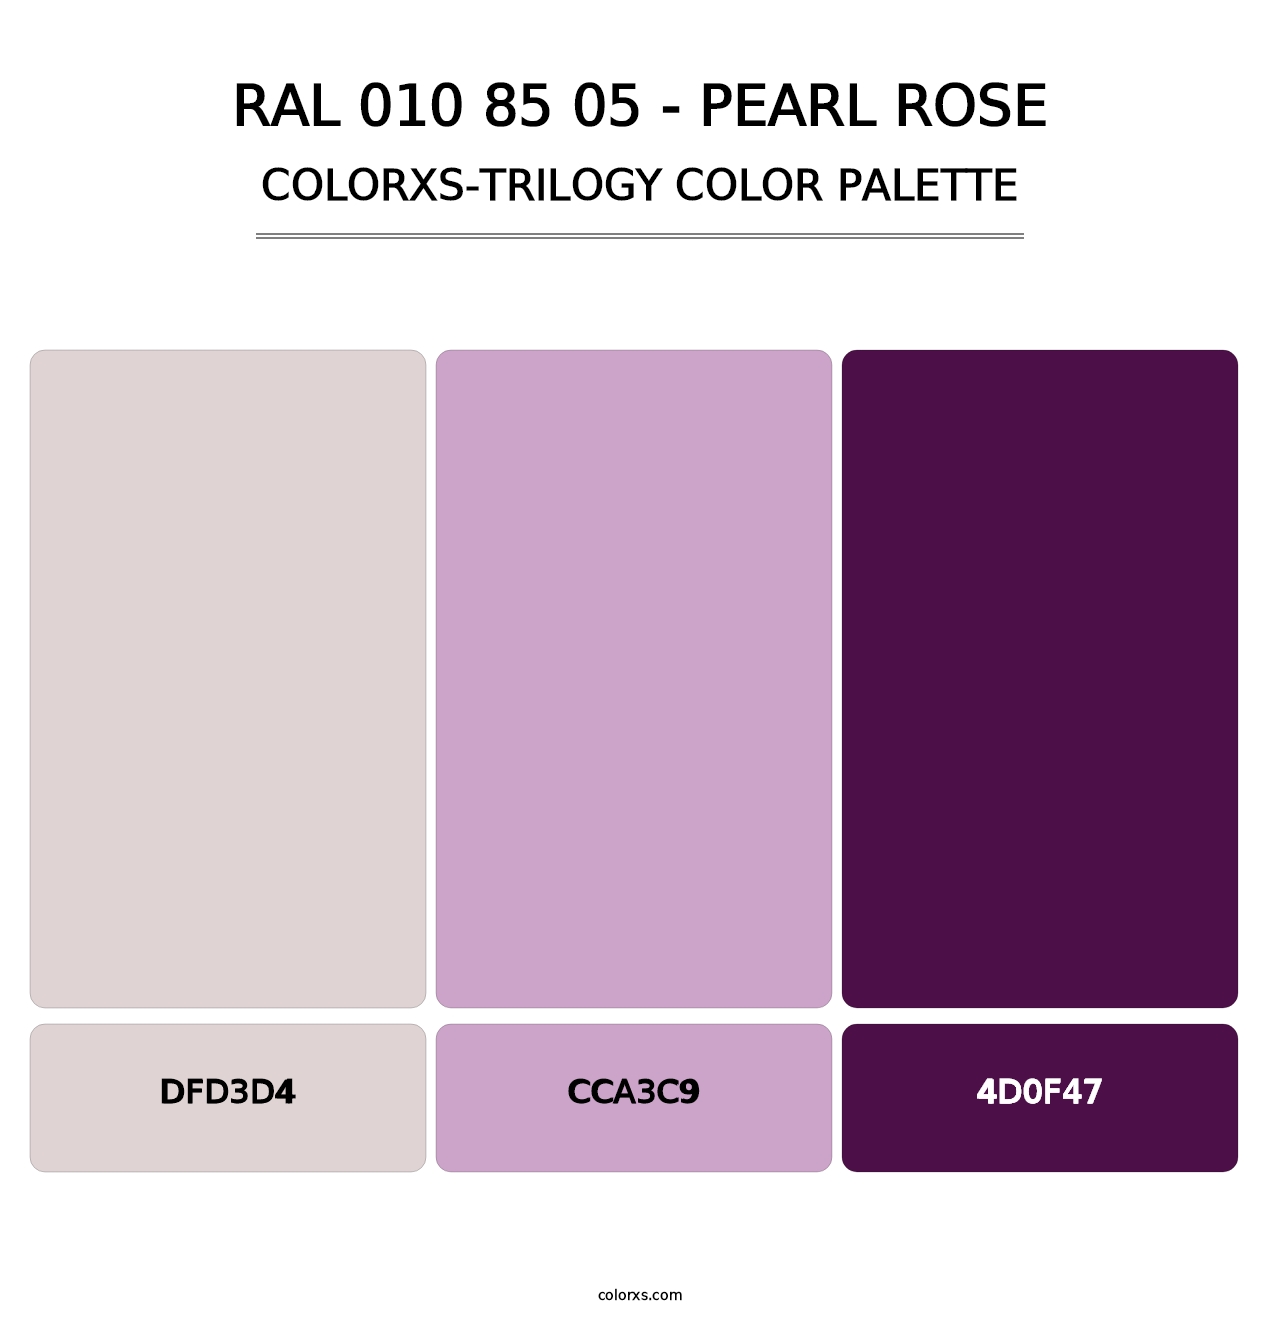 RAL 010 85 05 - Pearl Rose - Colorxs Trilogy Palette